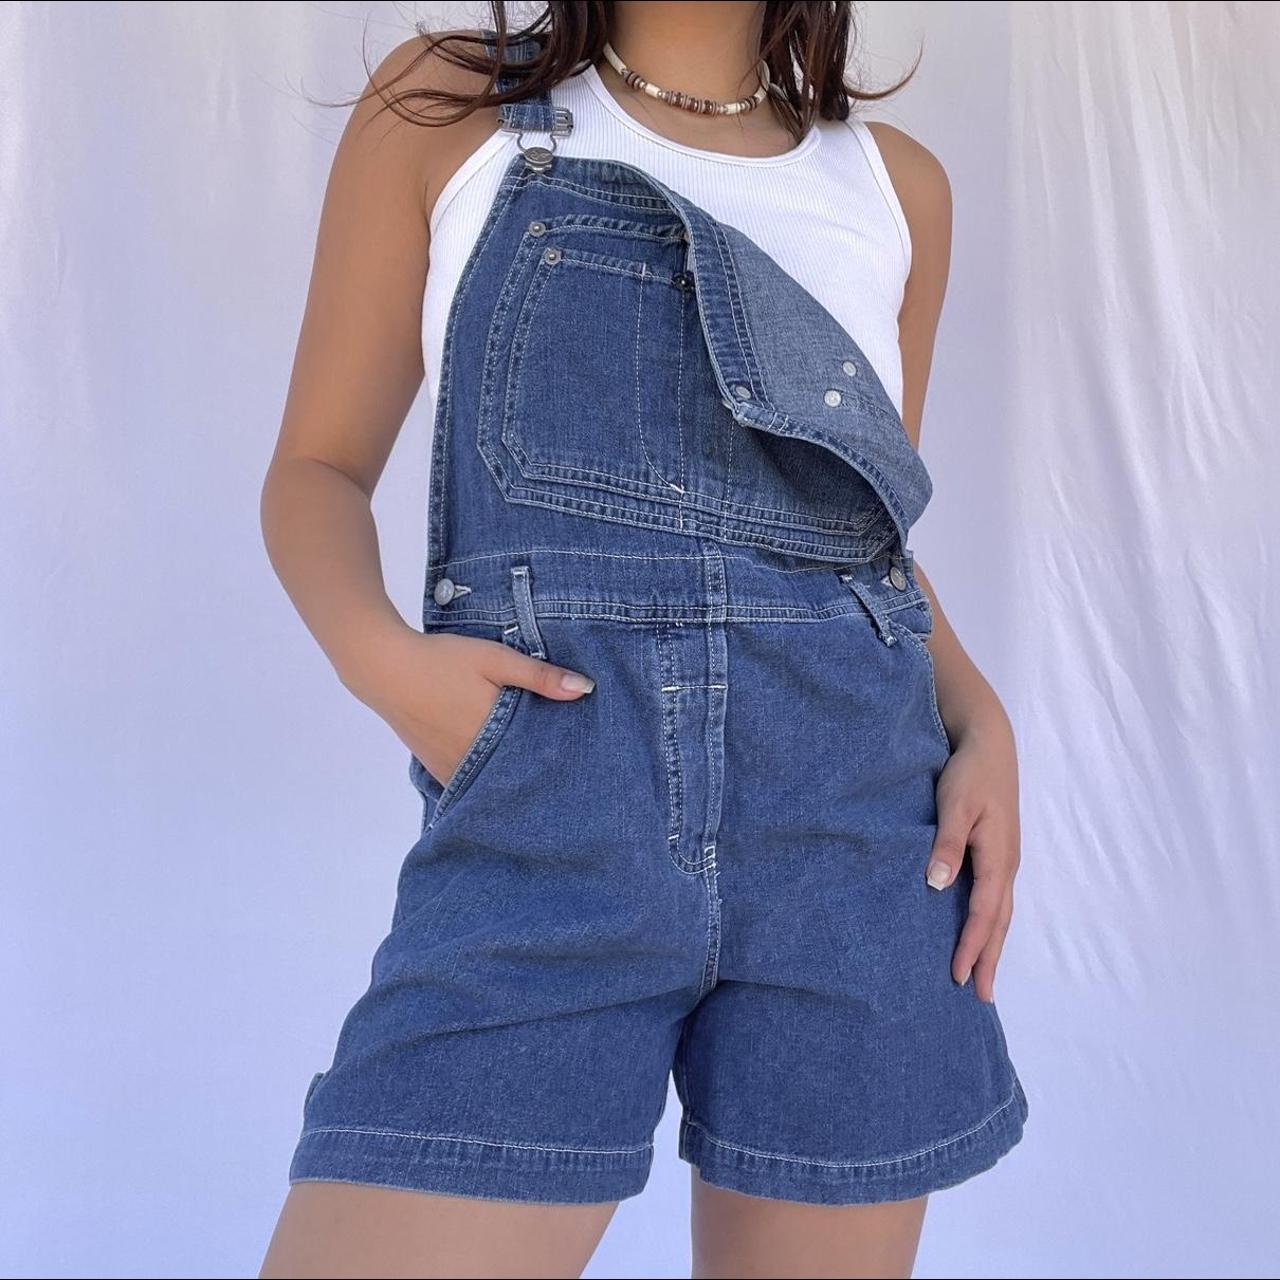 Calvin Klein Jeans Women's Navy and Blue Dungarees-overalls